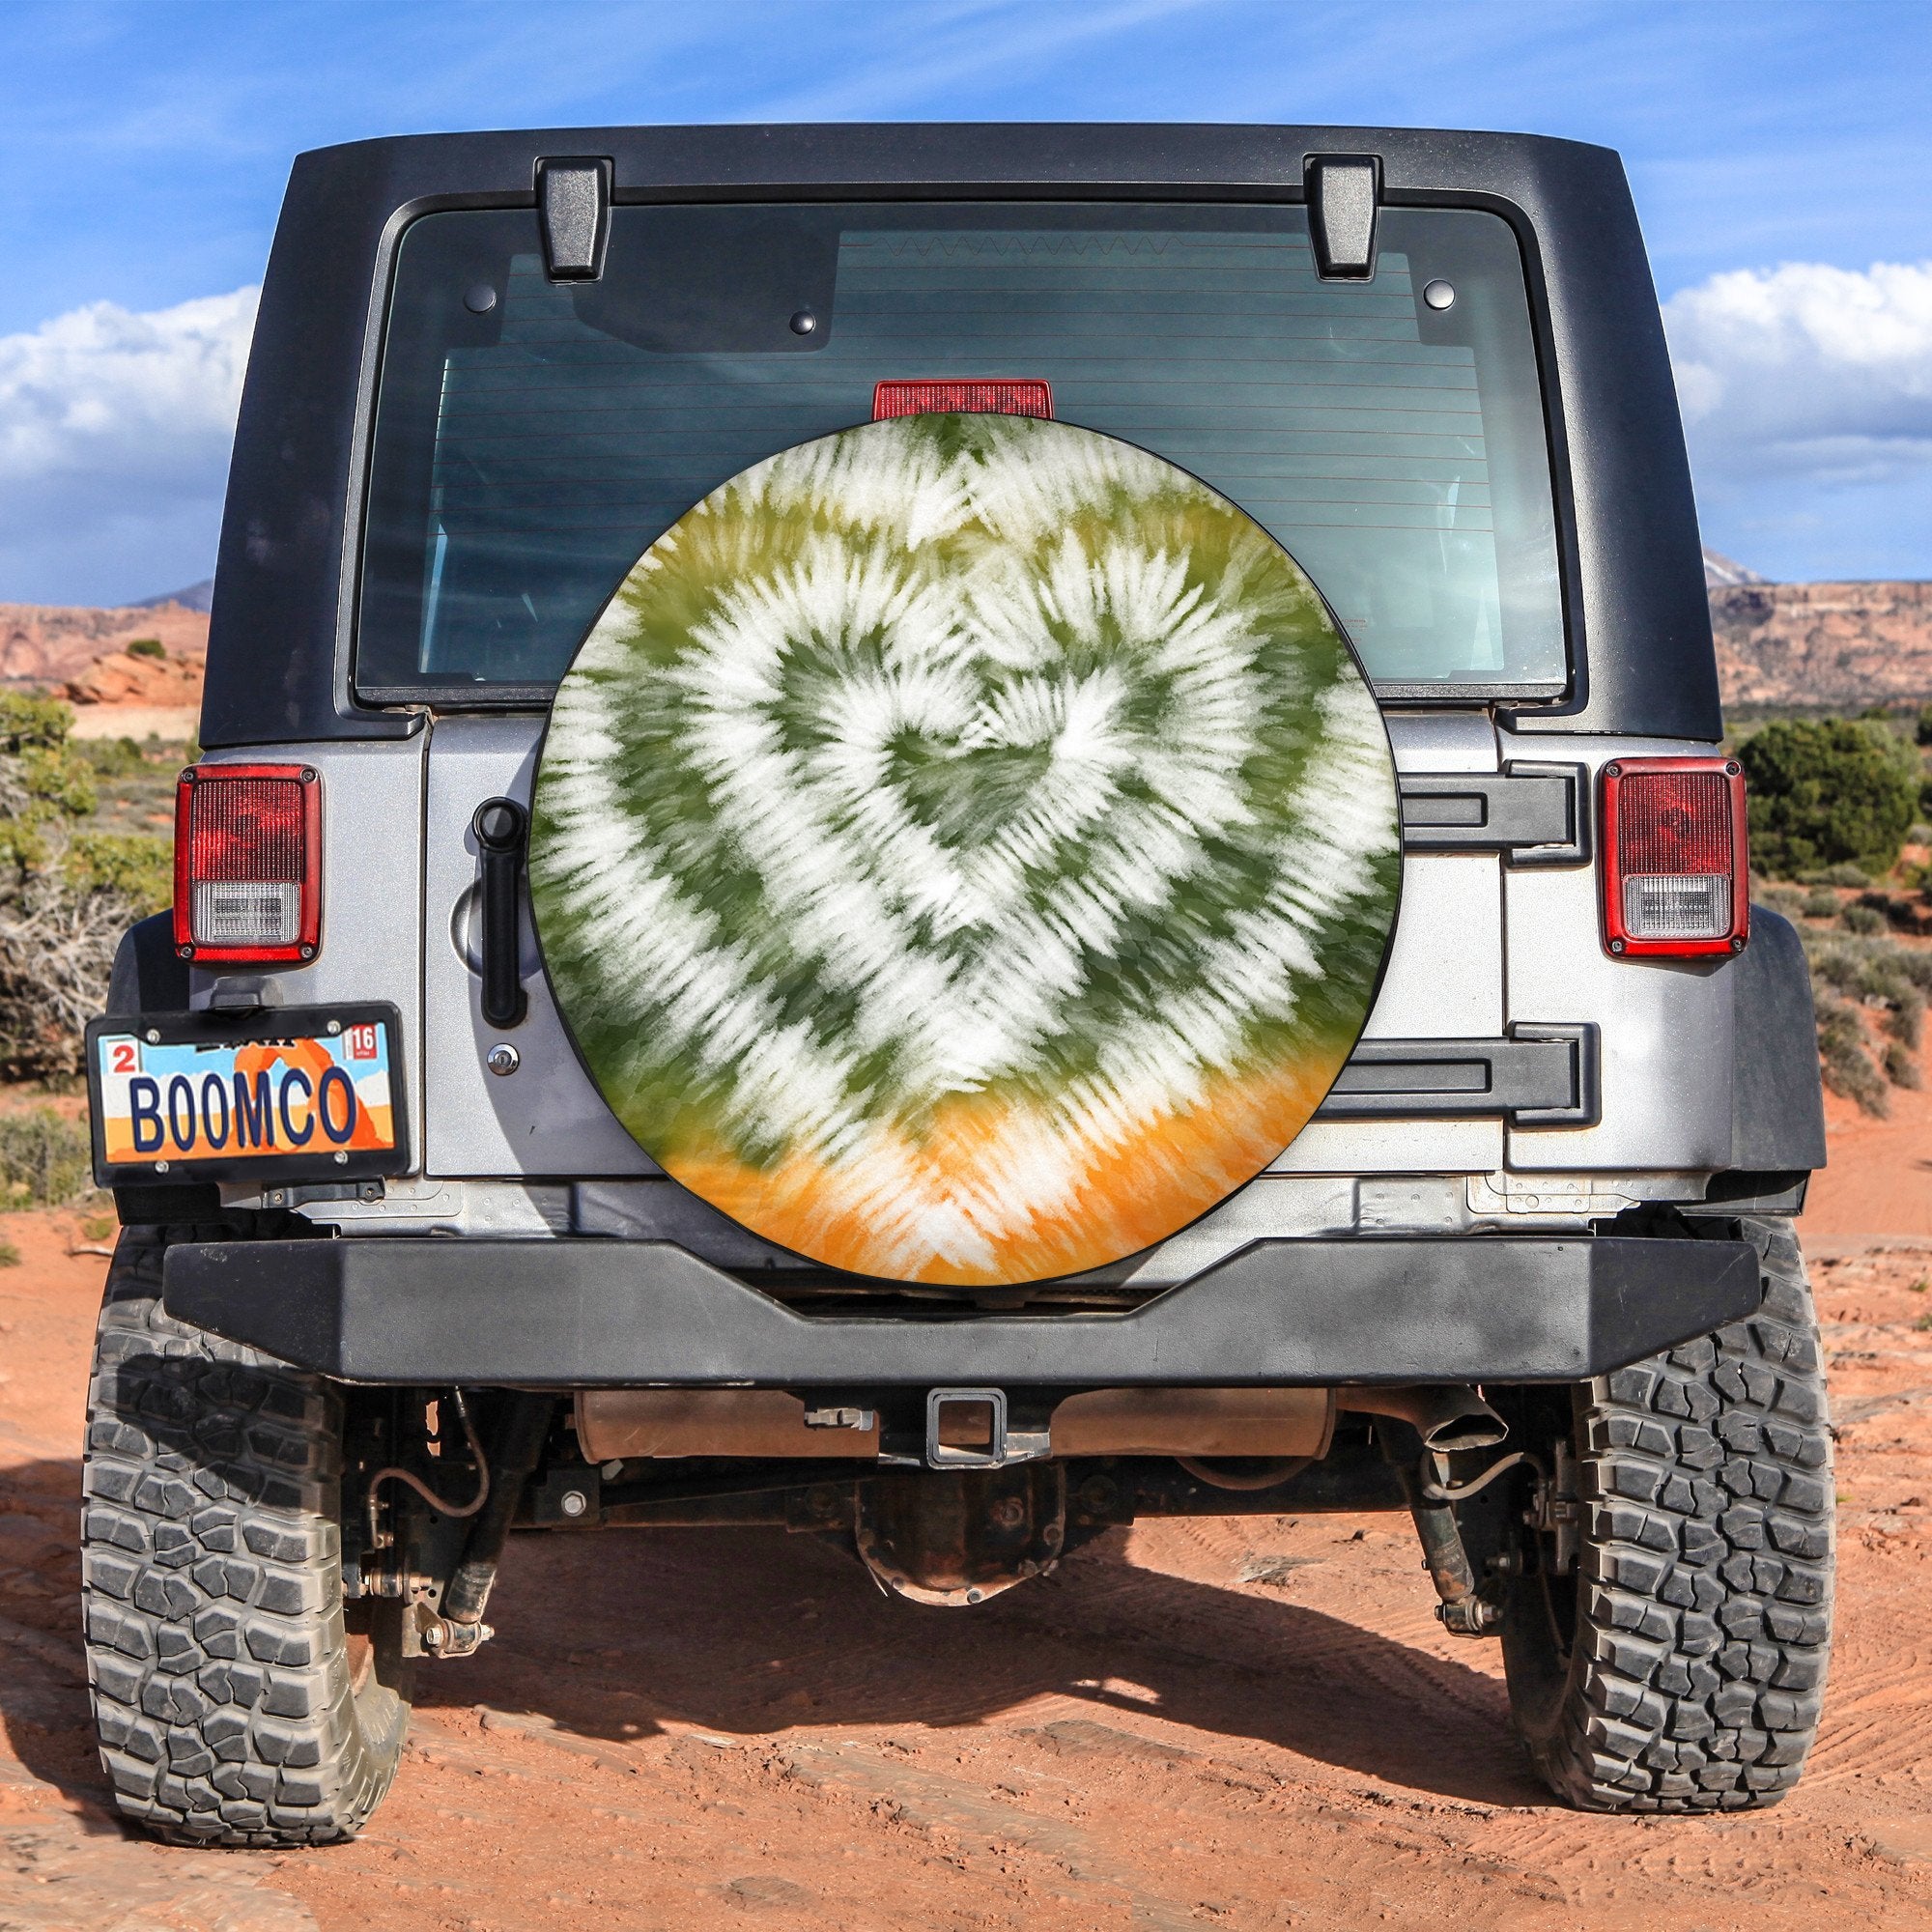 Tie Dye Colorful White Watercolor Spare Tire Cover Gift For Campers